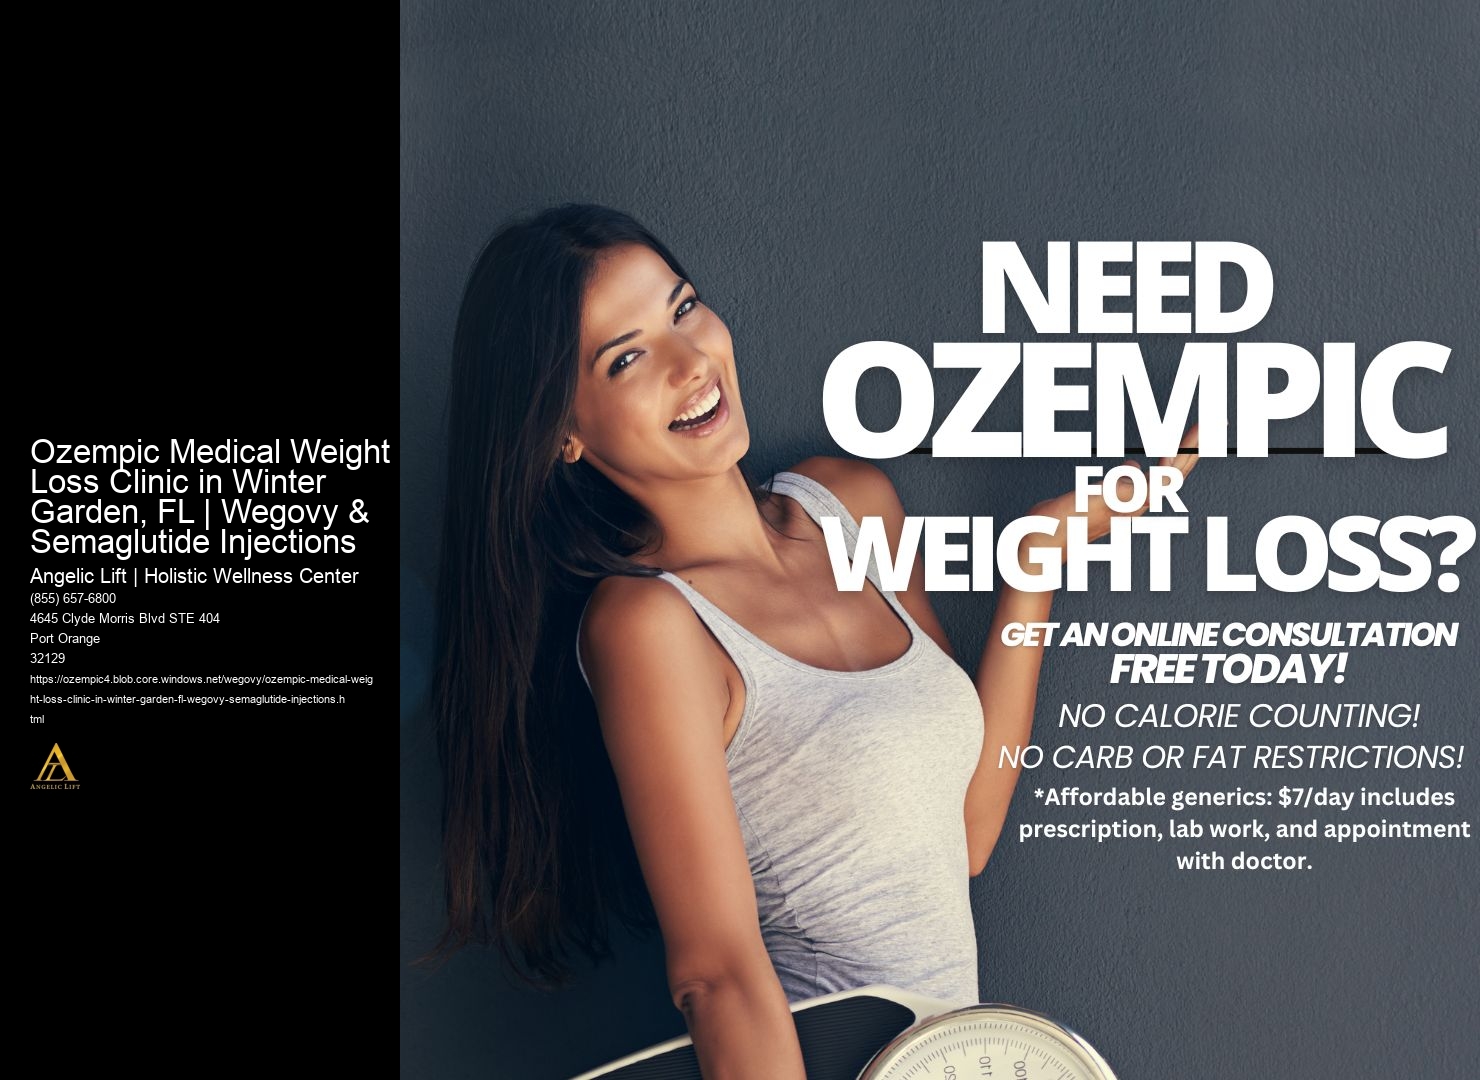 Ozempic Medical Weight Loss Clinic in Winter Garden, FL | Wegovy & Semaglutide Injections